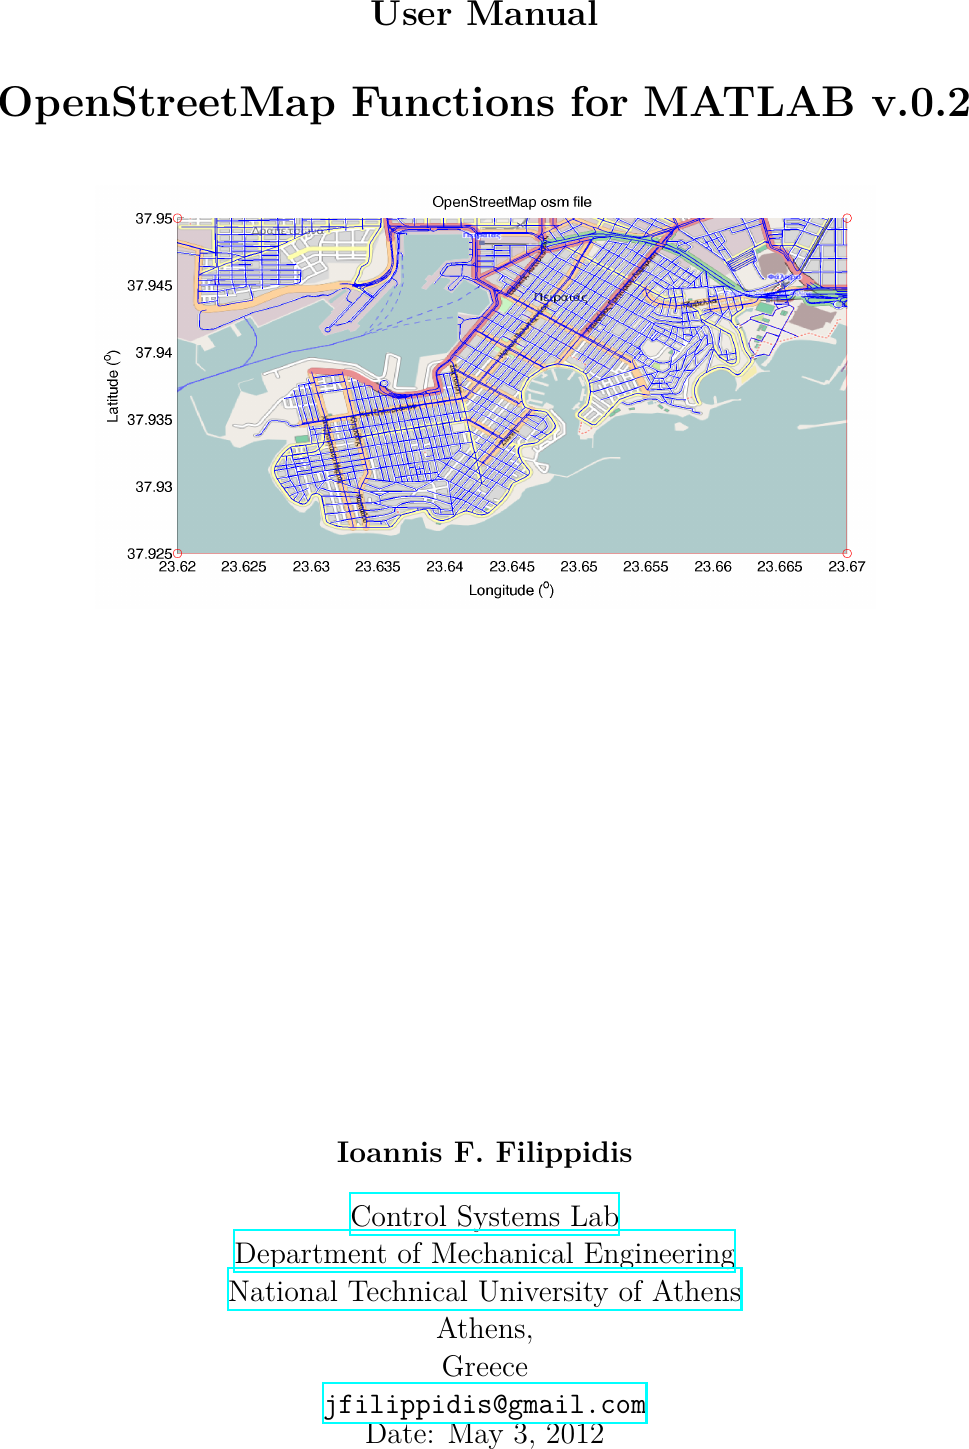 Page 1 of 8 - OpenStreetMap Toolbox For MATLAB V.0.1 User Manual V0.2